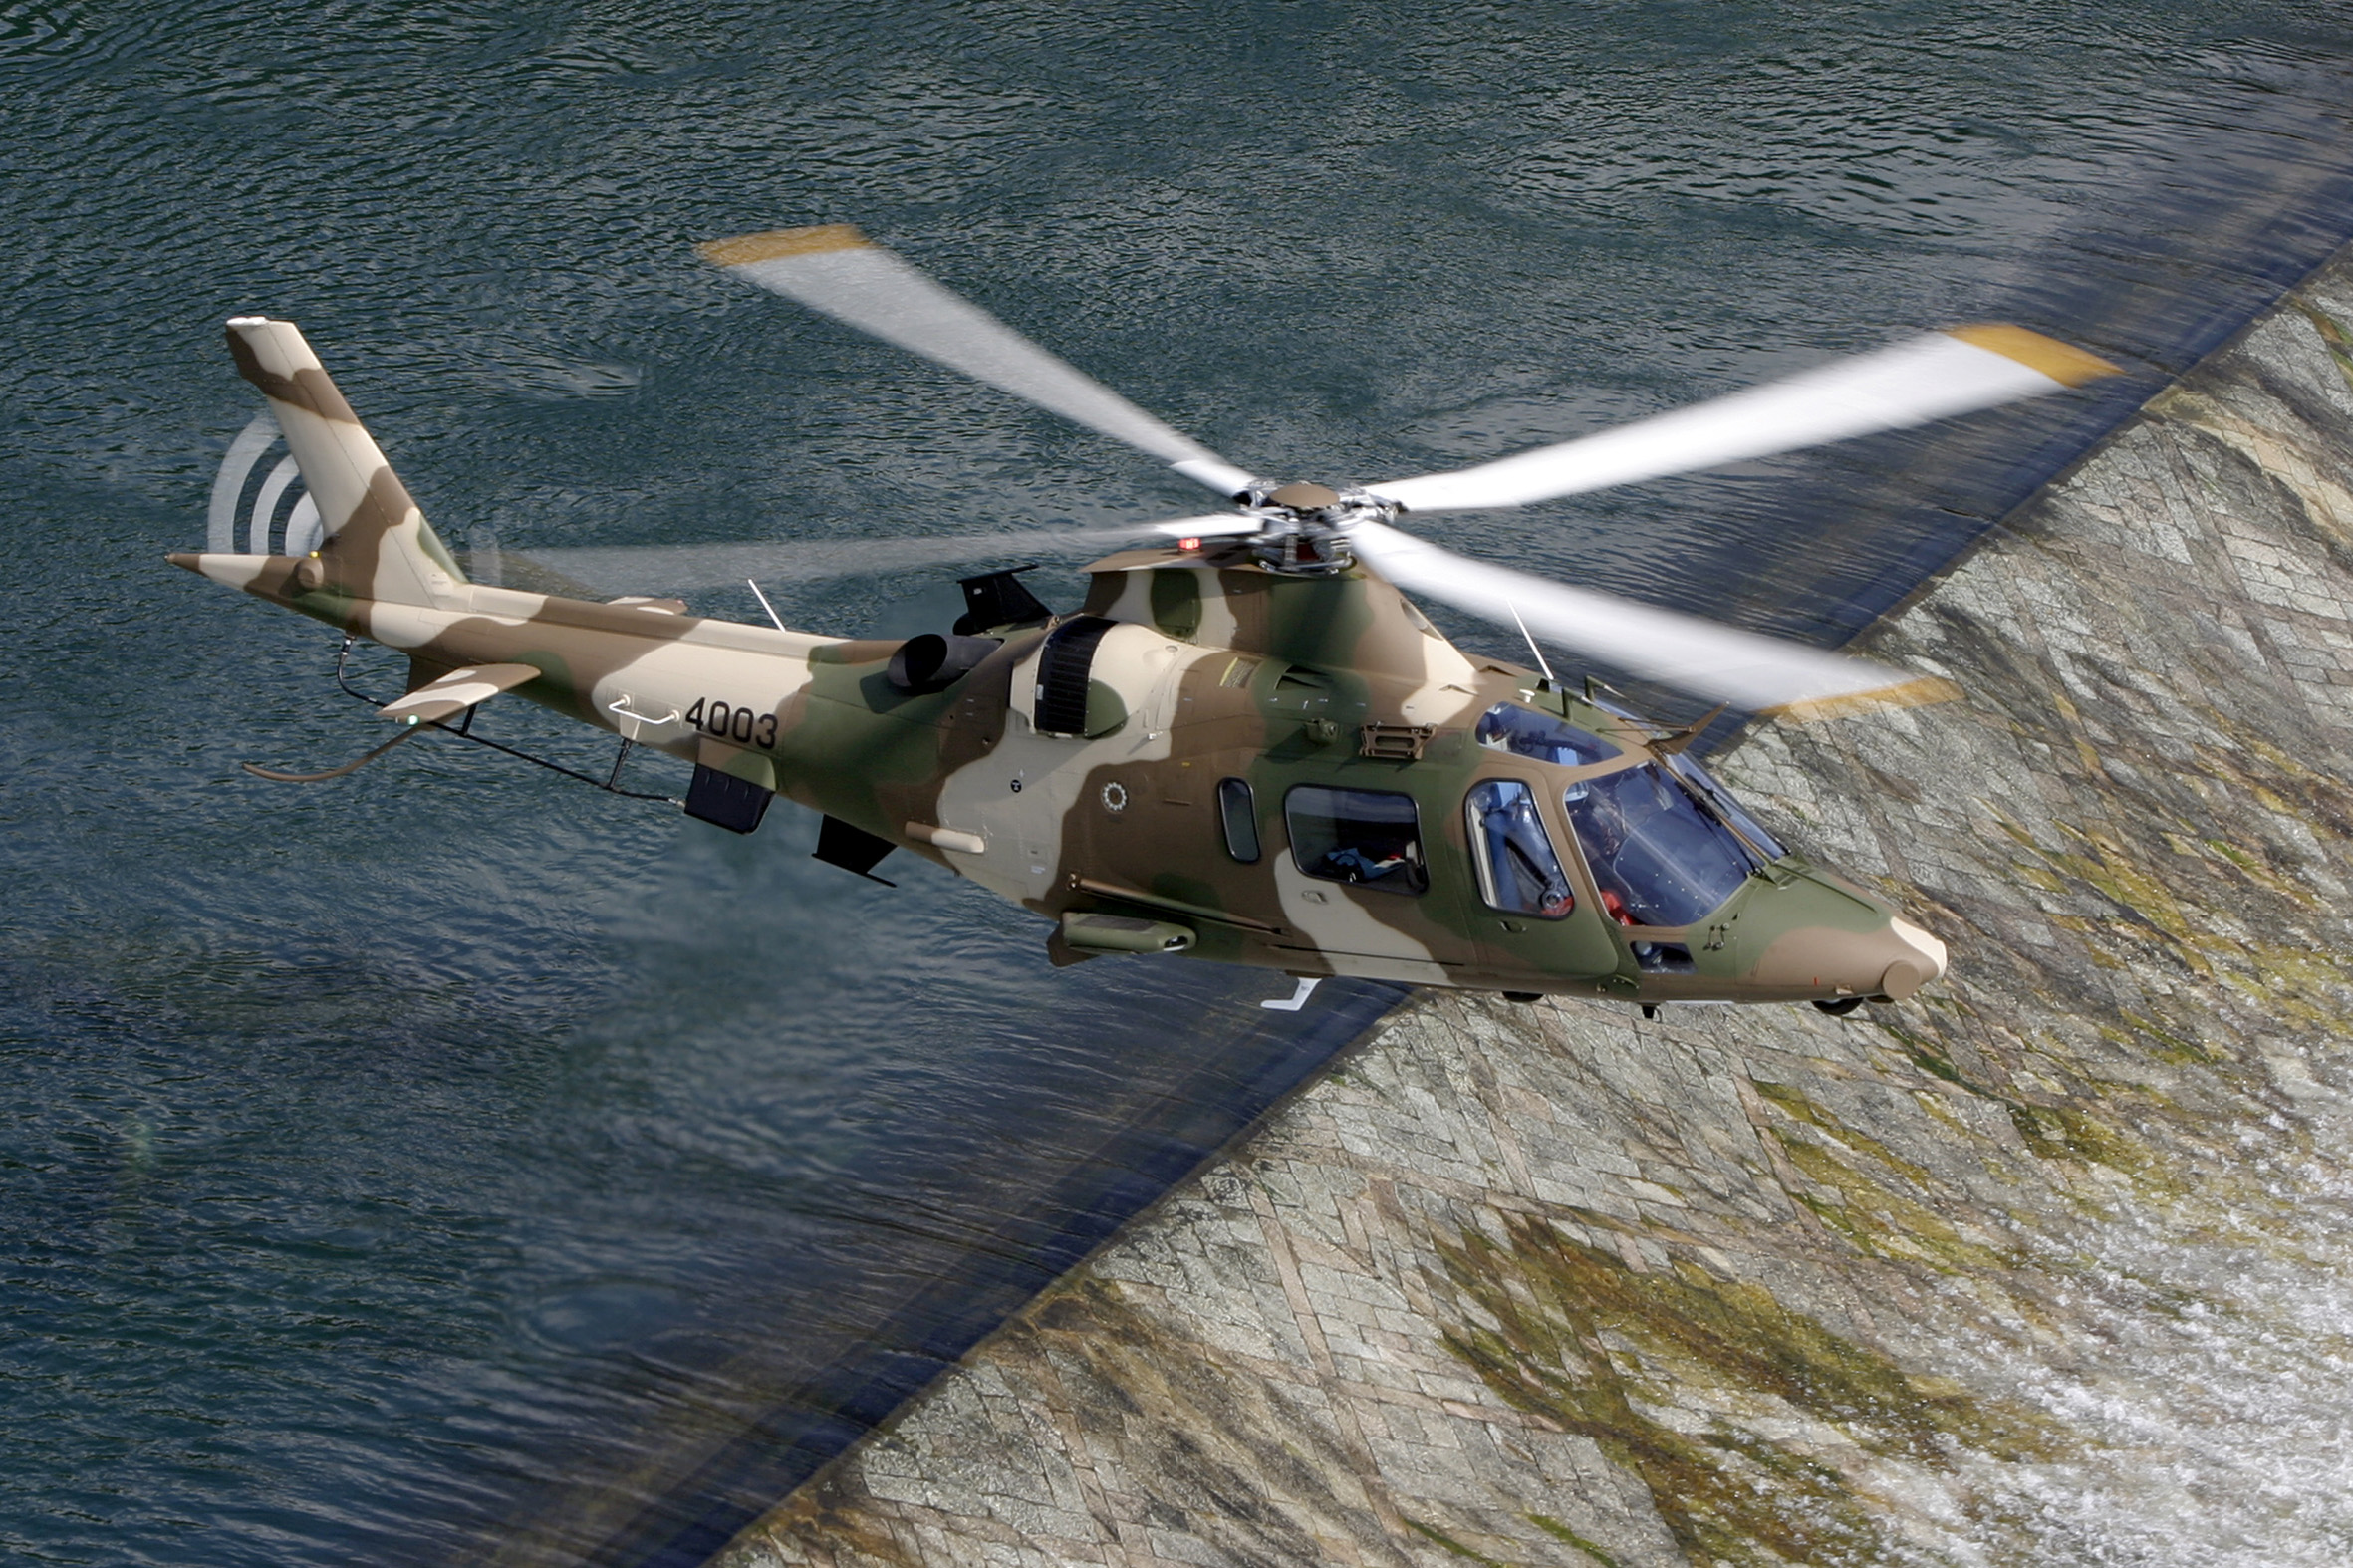 Military AgustaWestland AW109 HD Wallpaper | Background Image